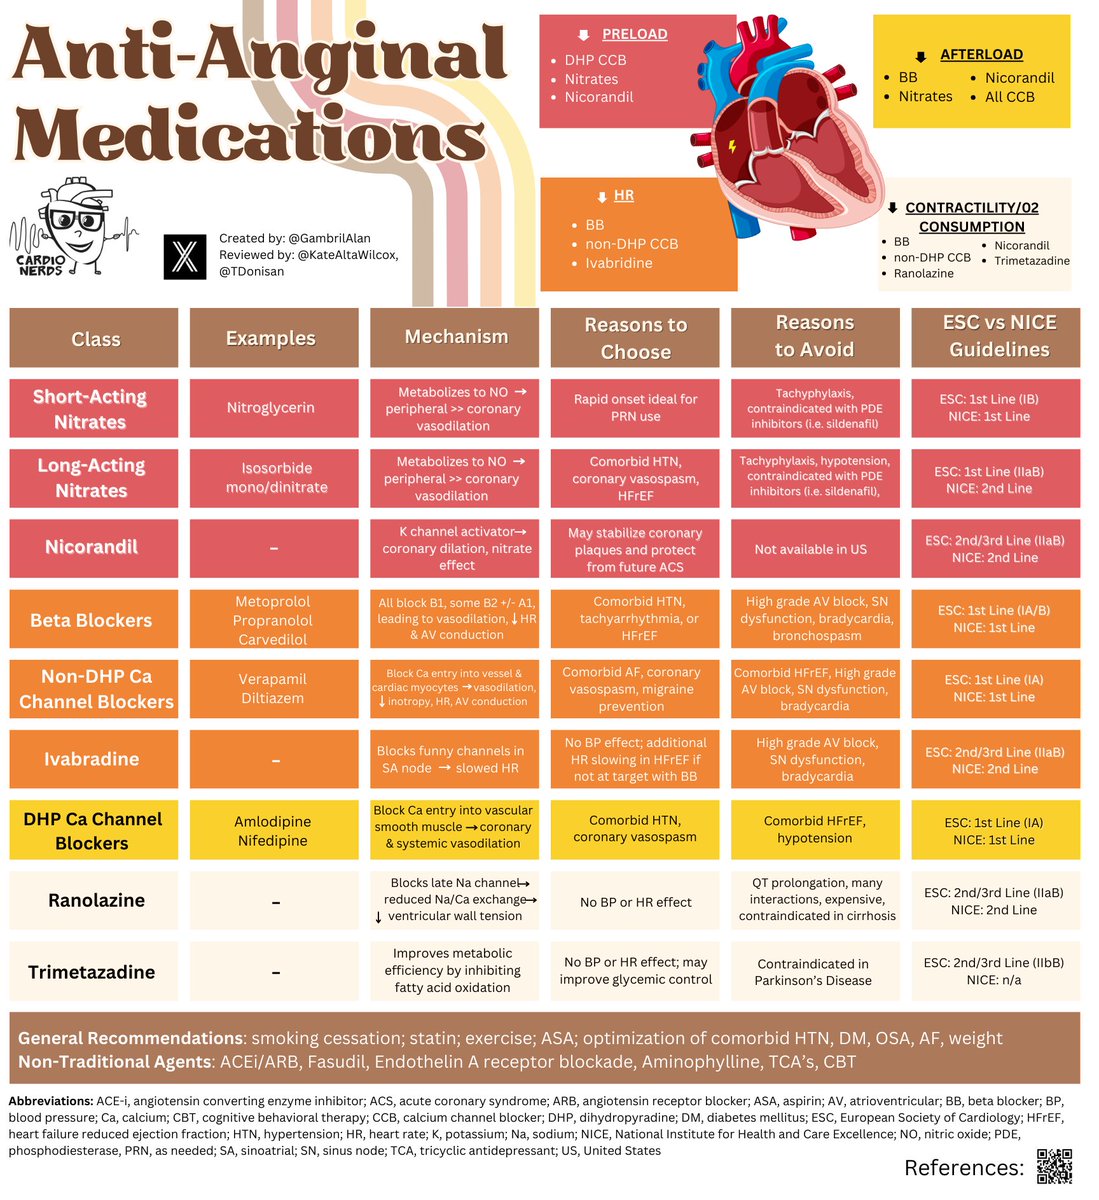 🫀What options exist for the medical management of angina? 💊How do they reduce angina? 🤔How do you choose which agent(s) to use? Check out my new @CardioNerds infographic on Anti-Anginal Meds for a quick reference on classes, mechanisms, pros/cons, & guideline recs! #MedEd